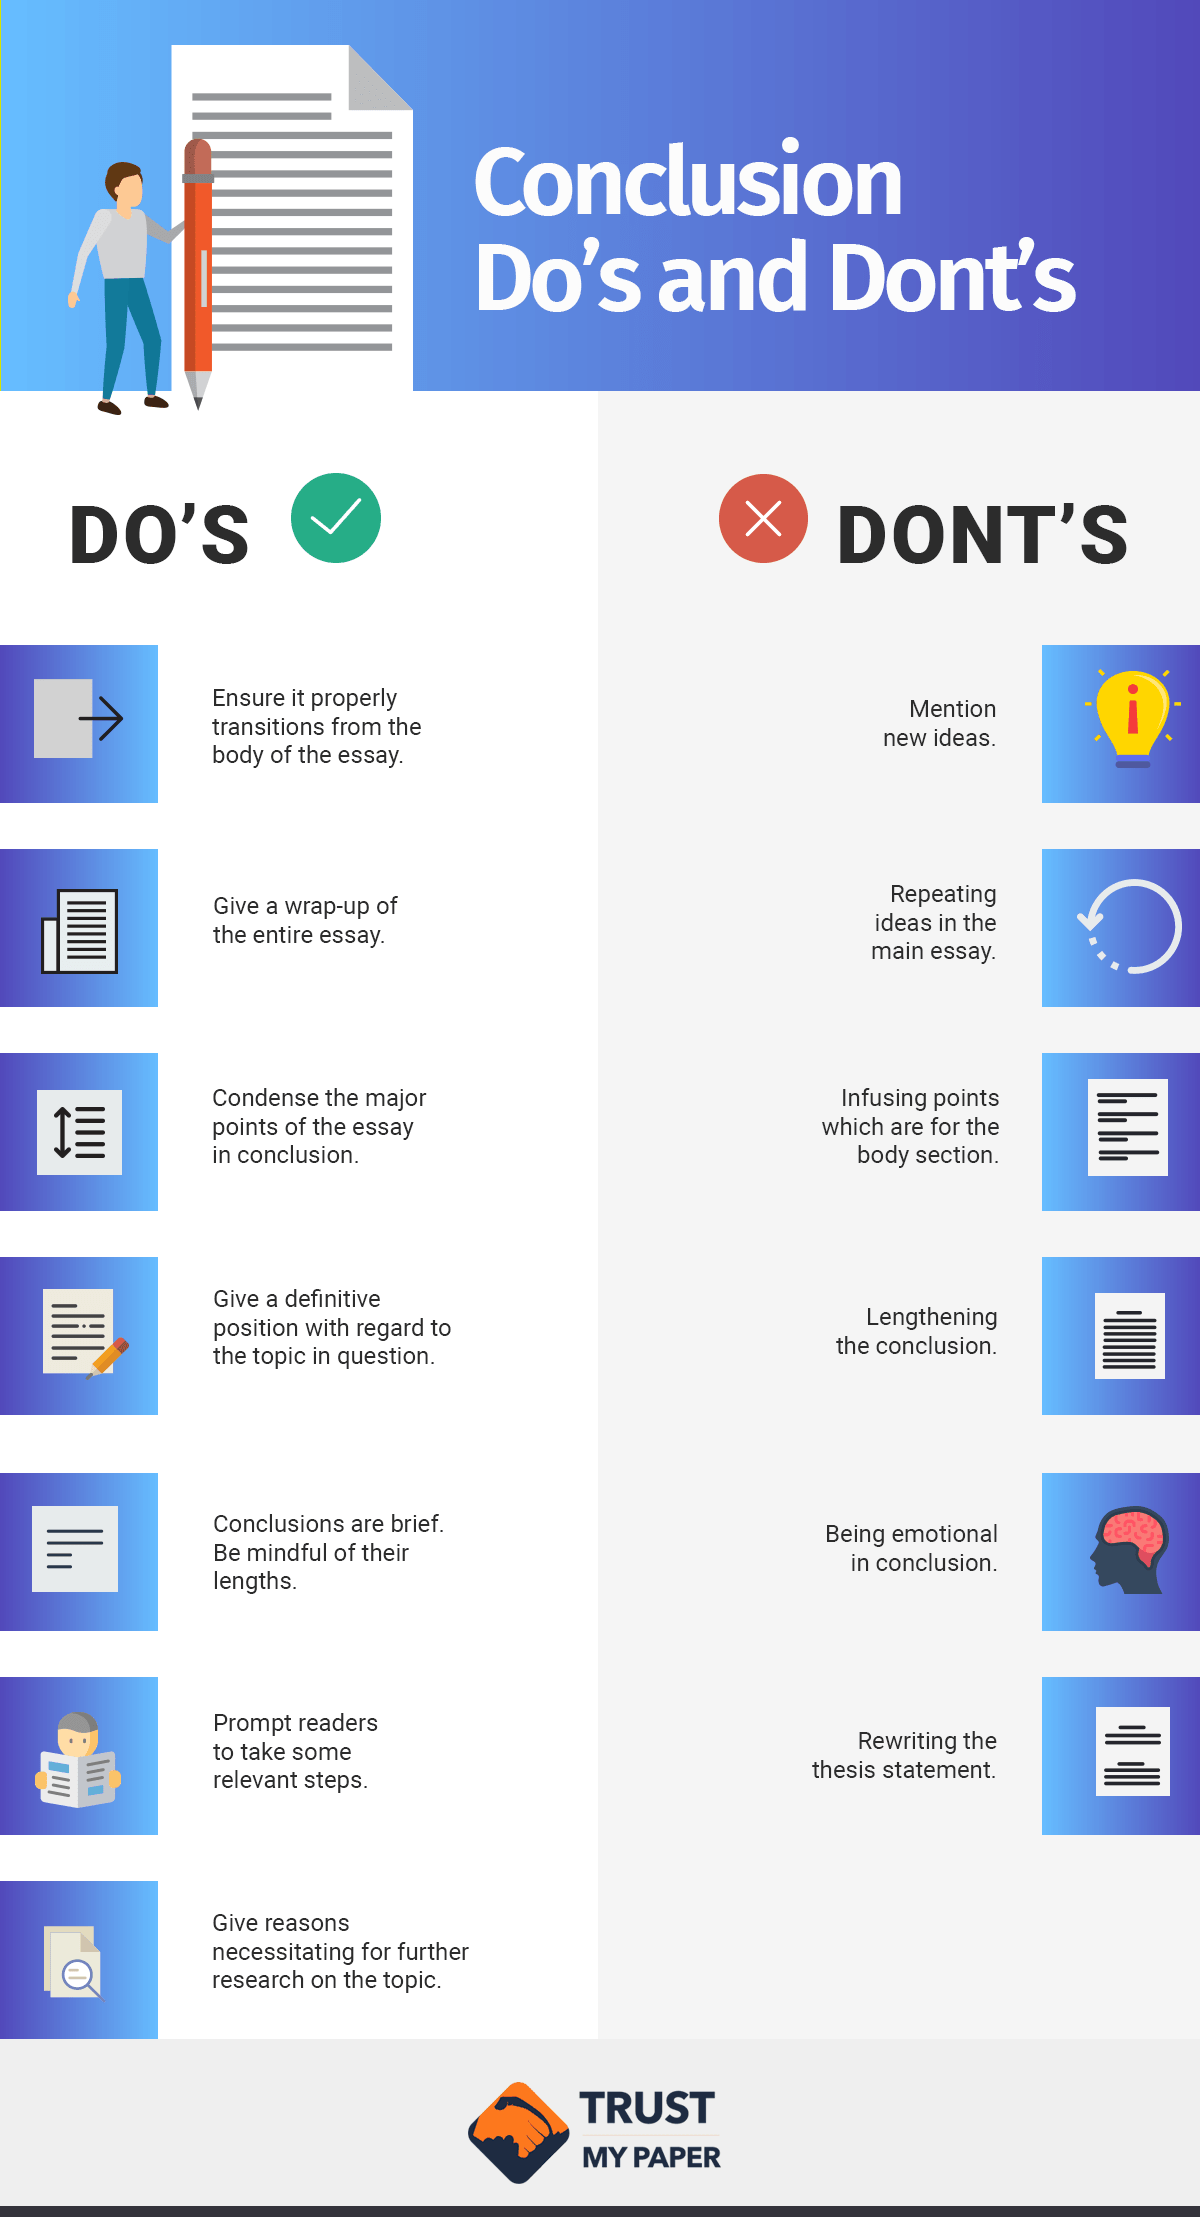 Conclusion Dos and Donts infographic